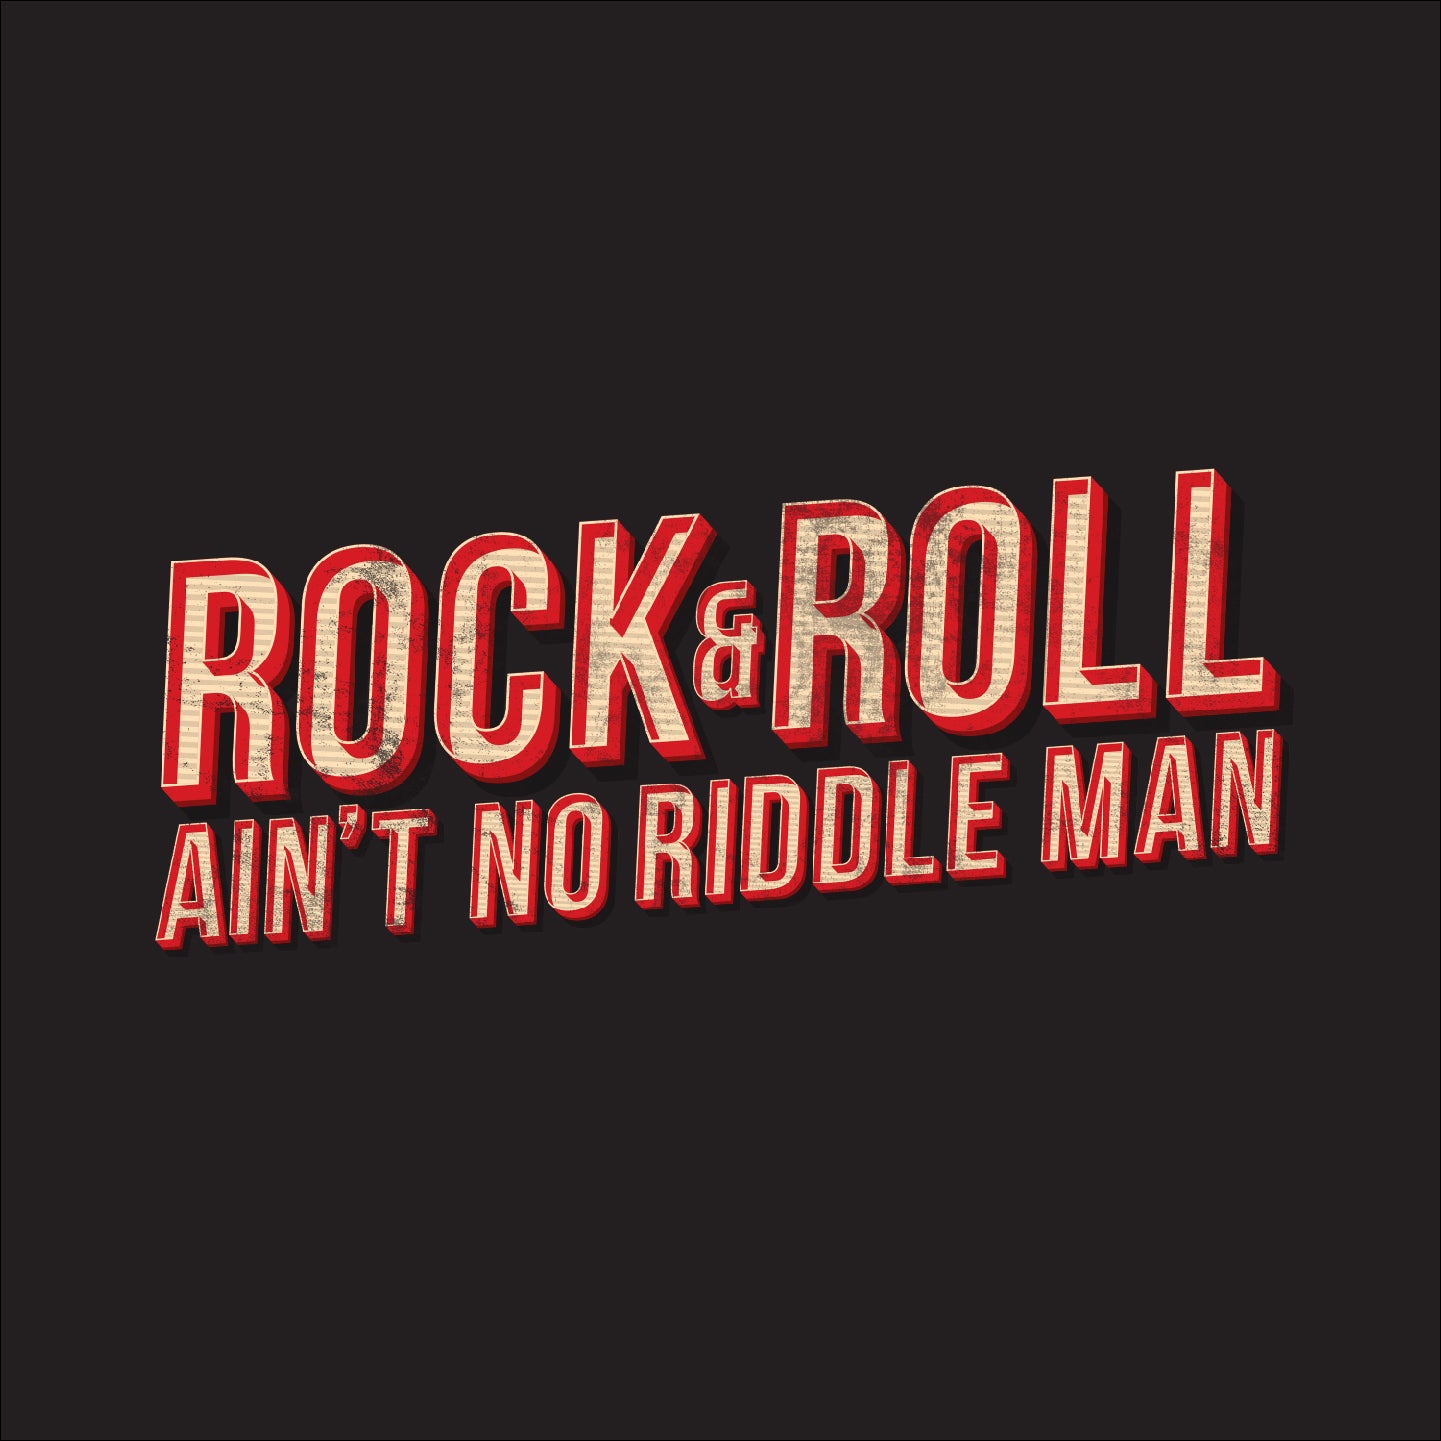 Rock & Roll ain't no riddle man